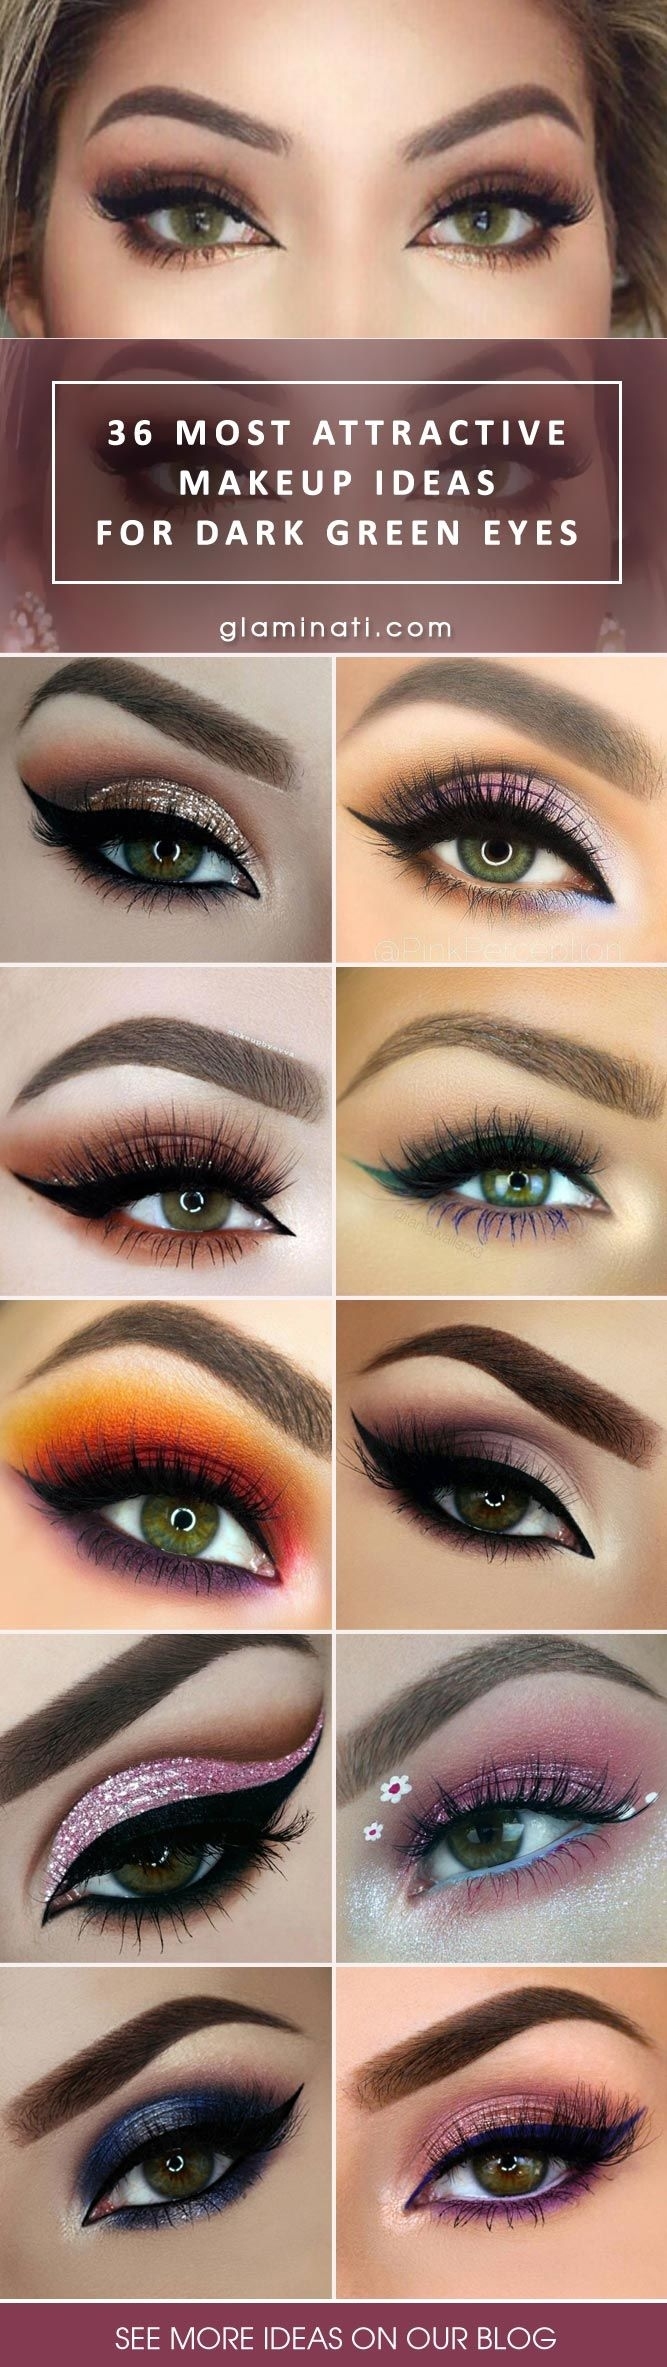 42 Most Attractive Makeup Ideas For Dark Green Eyes | Makeup for Brown Eyeshadow For Green Eyes